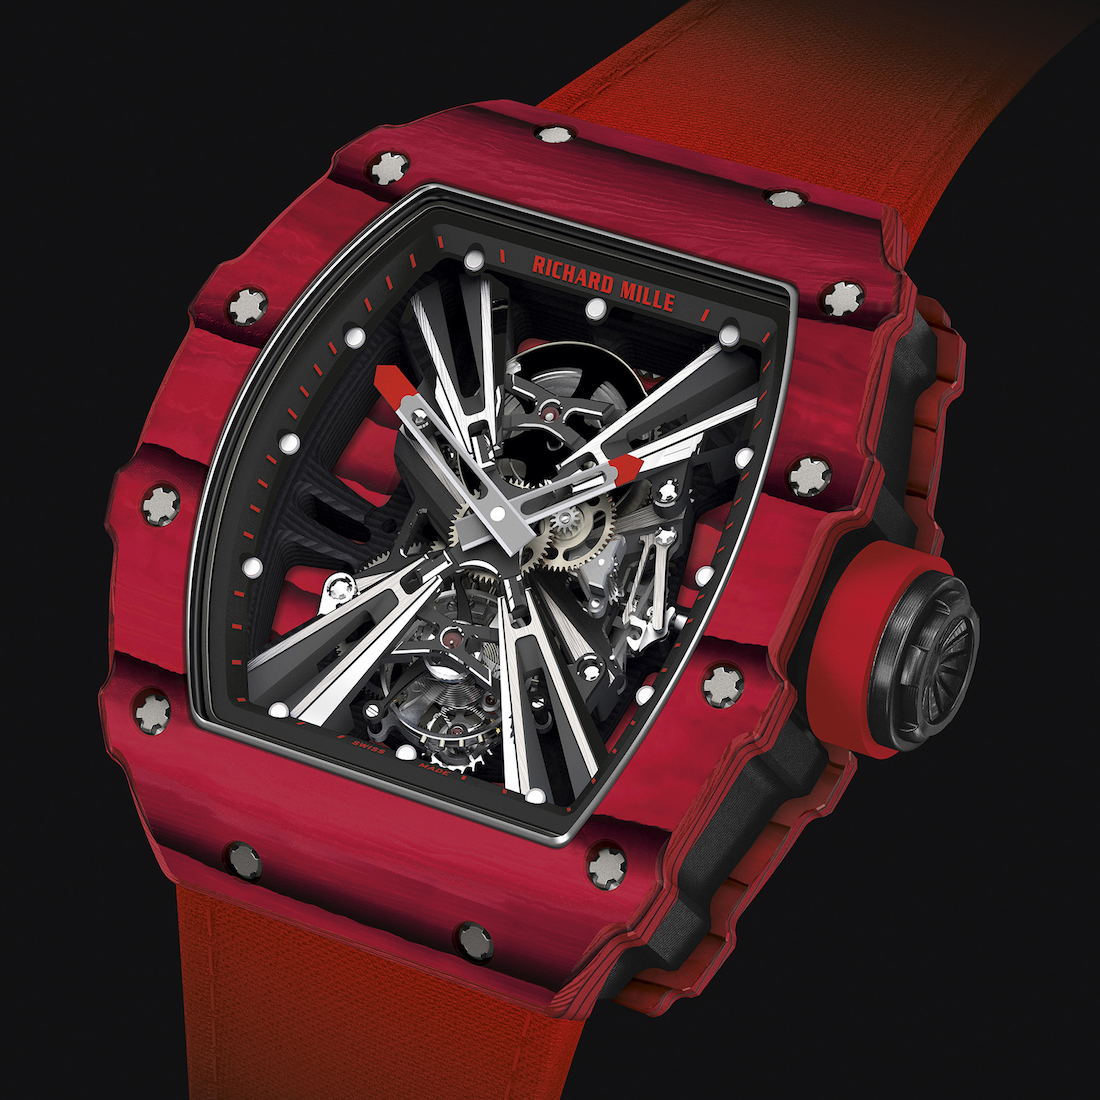 News Richard Mille Rm 12 01 Tourbillon Four Different 18 Piece Limited Editions For The Americas Watch Collecting Lifestyle